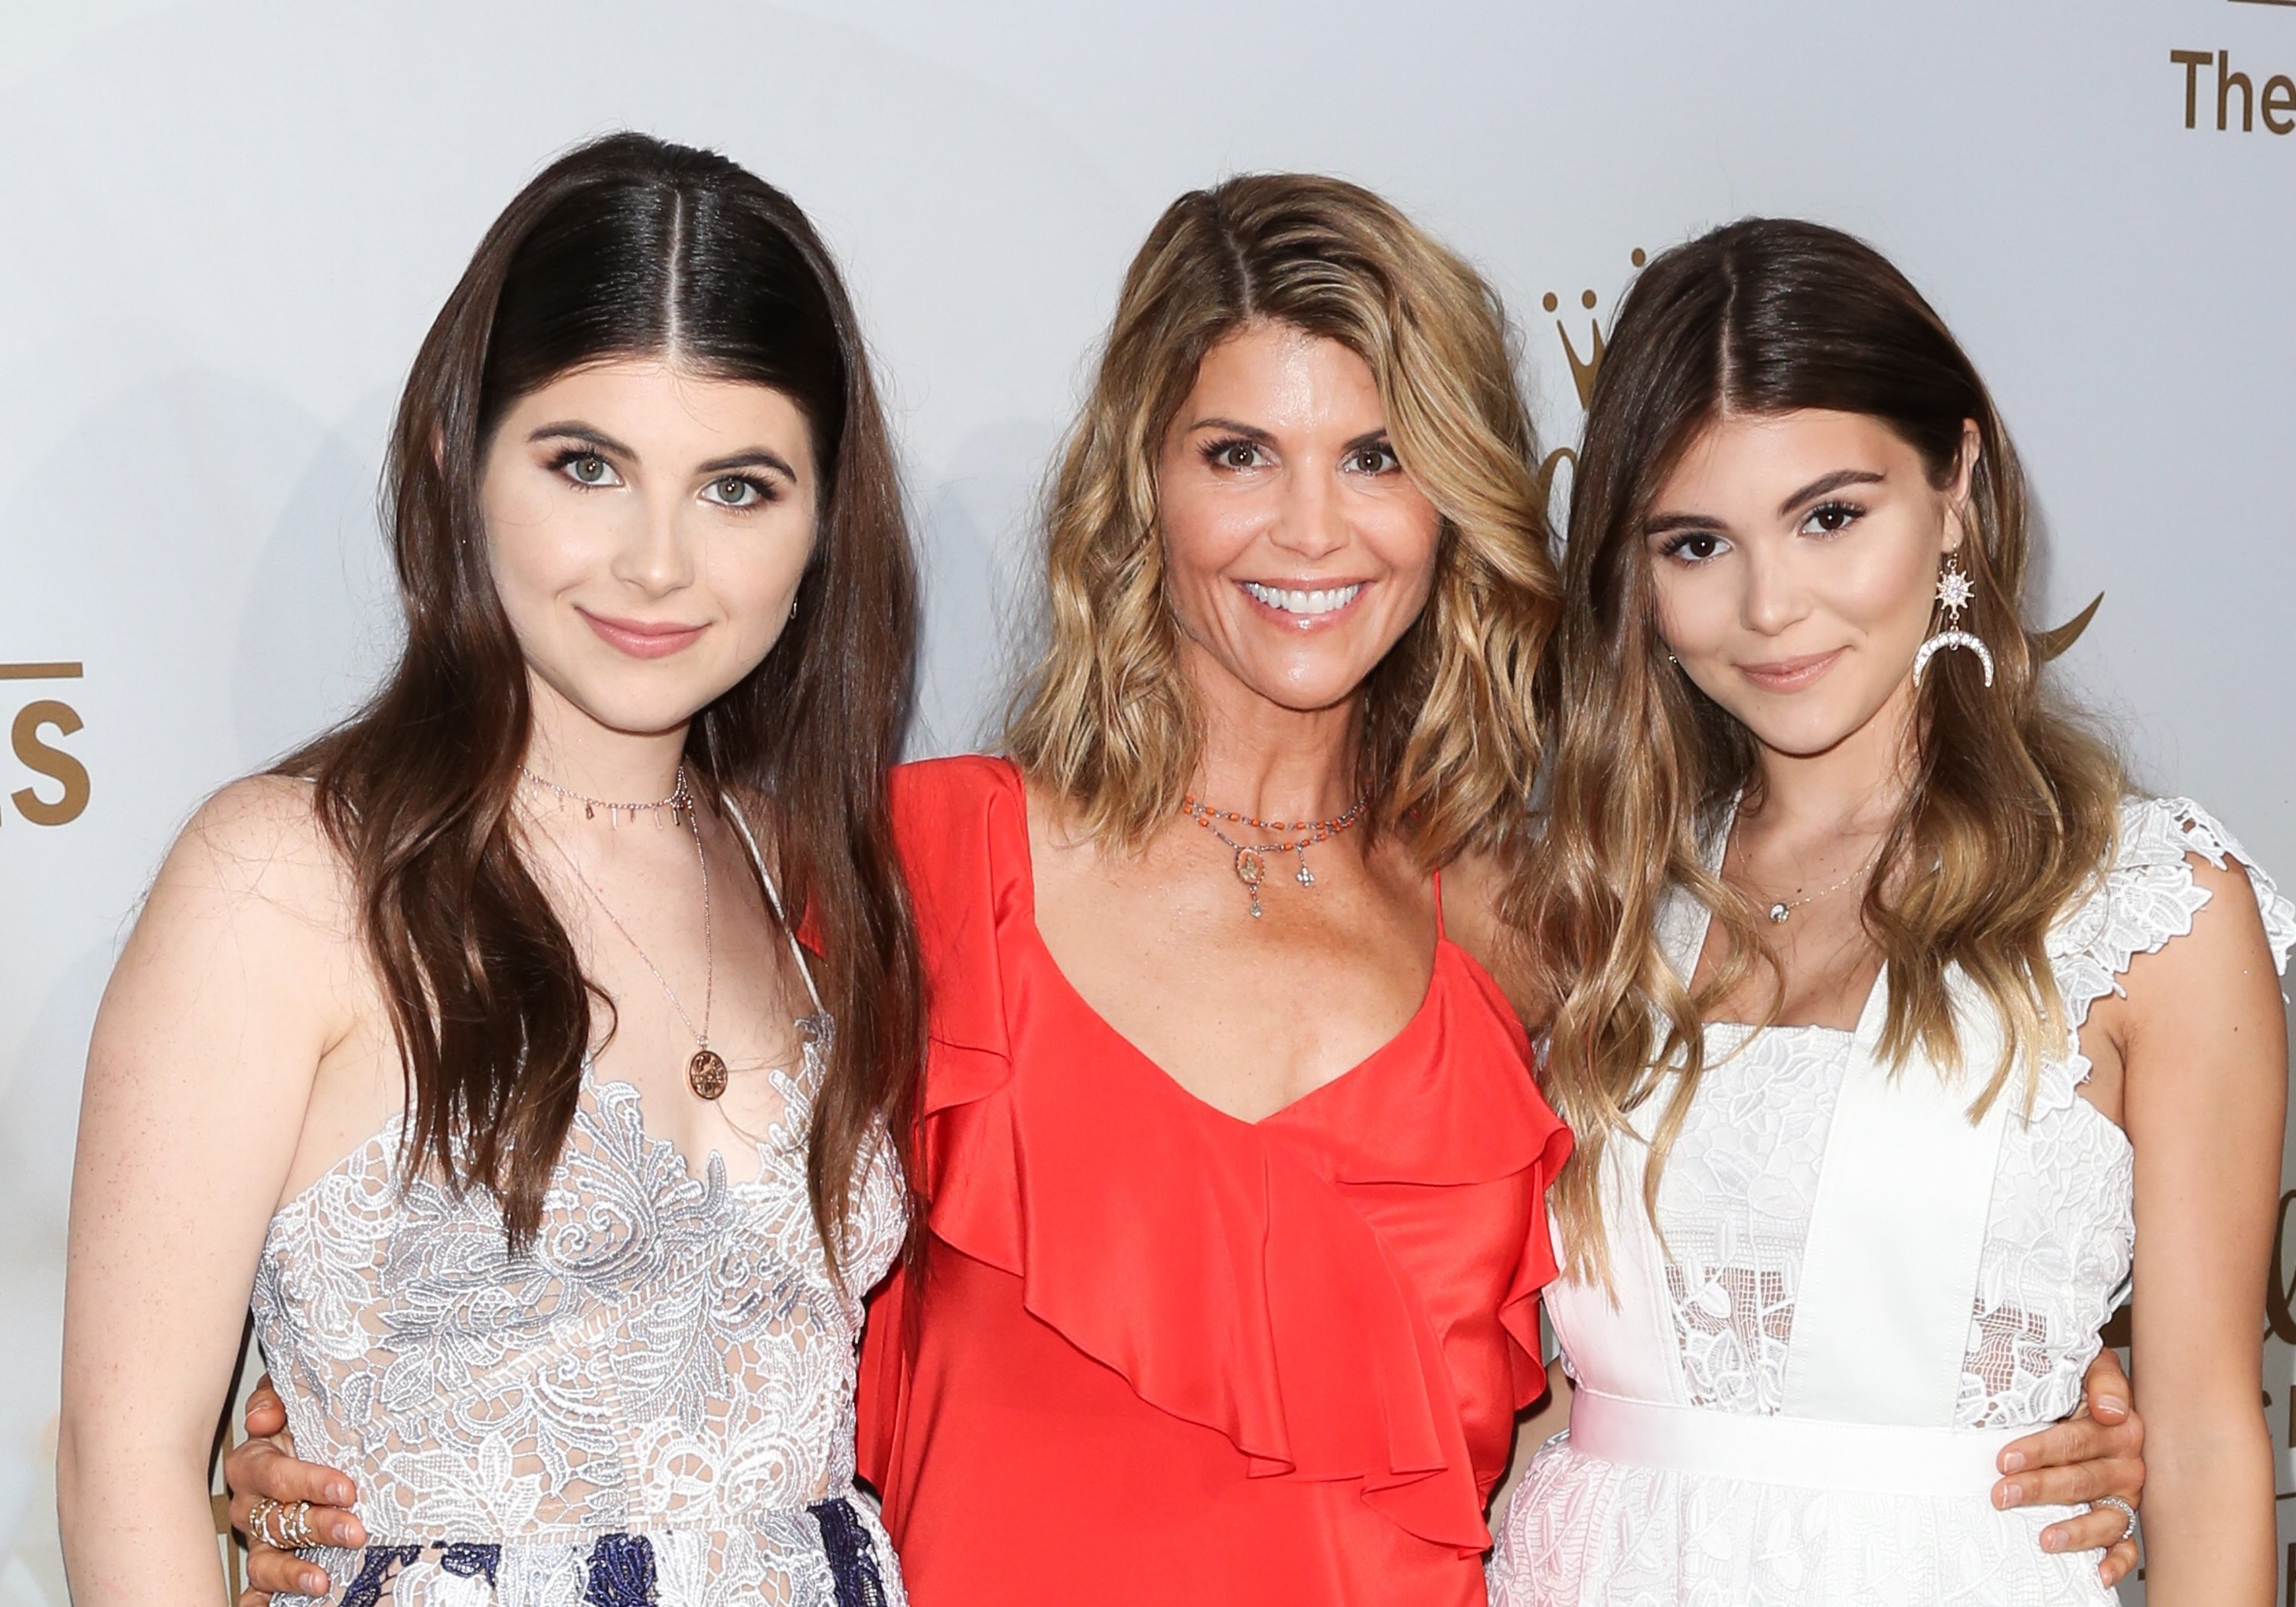 Lori Loughlin and her daughters Isabella Rose and Olivia Jade Giannulli